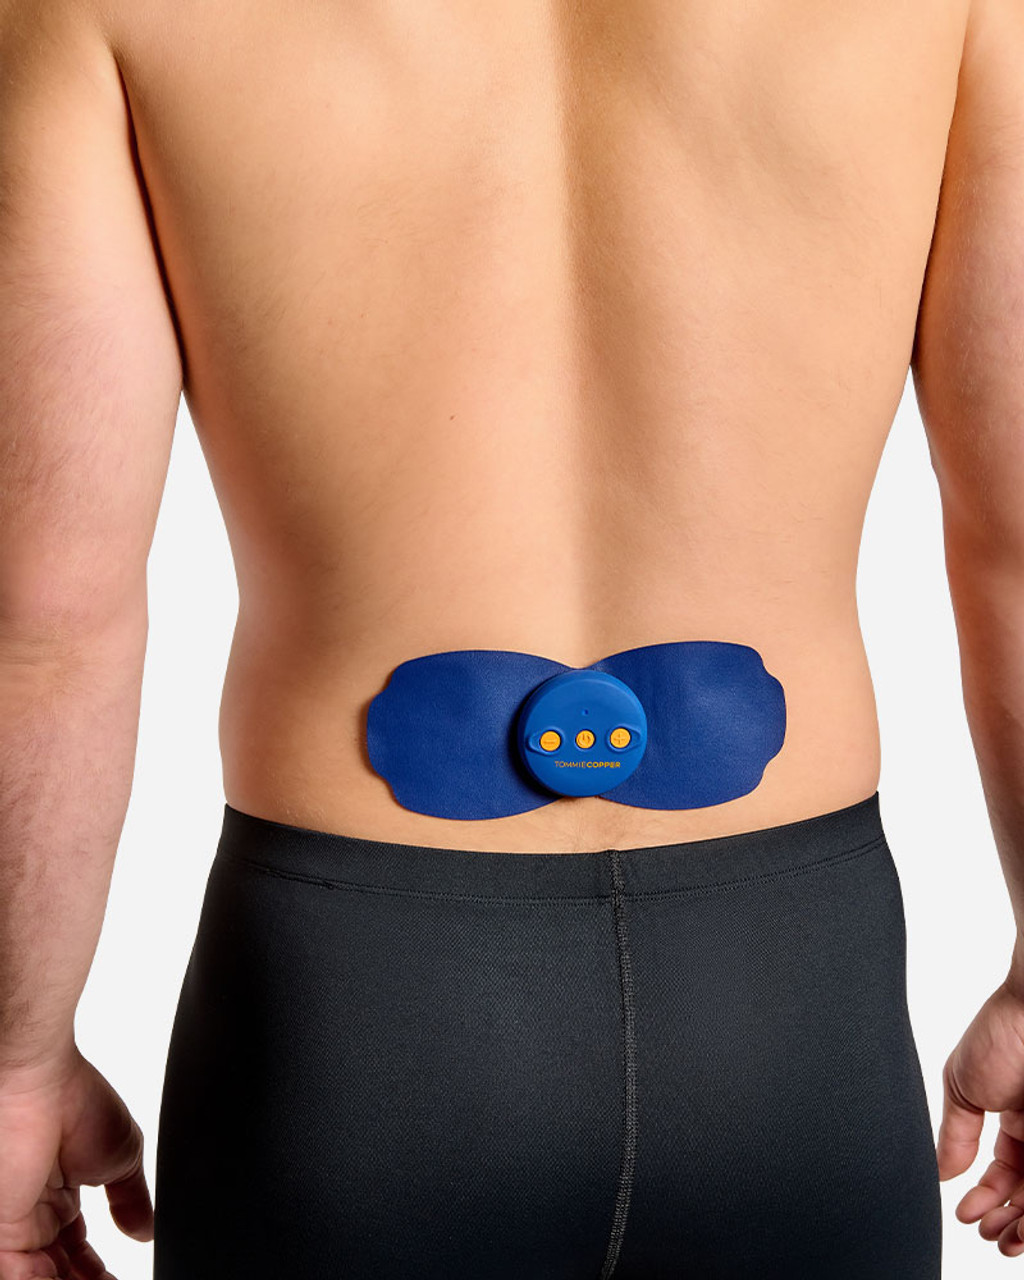 The Versatile TENS Device For Lower Back Pain & Muscle Pain